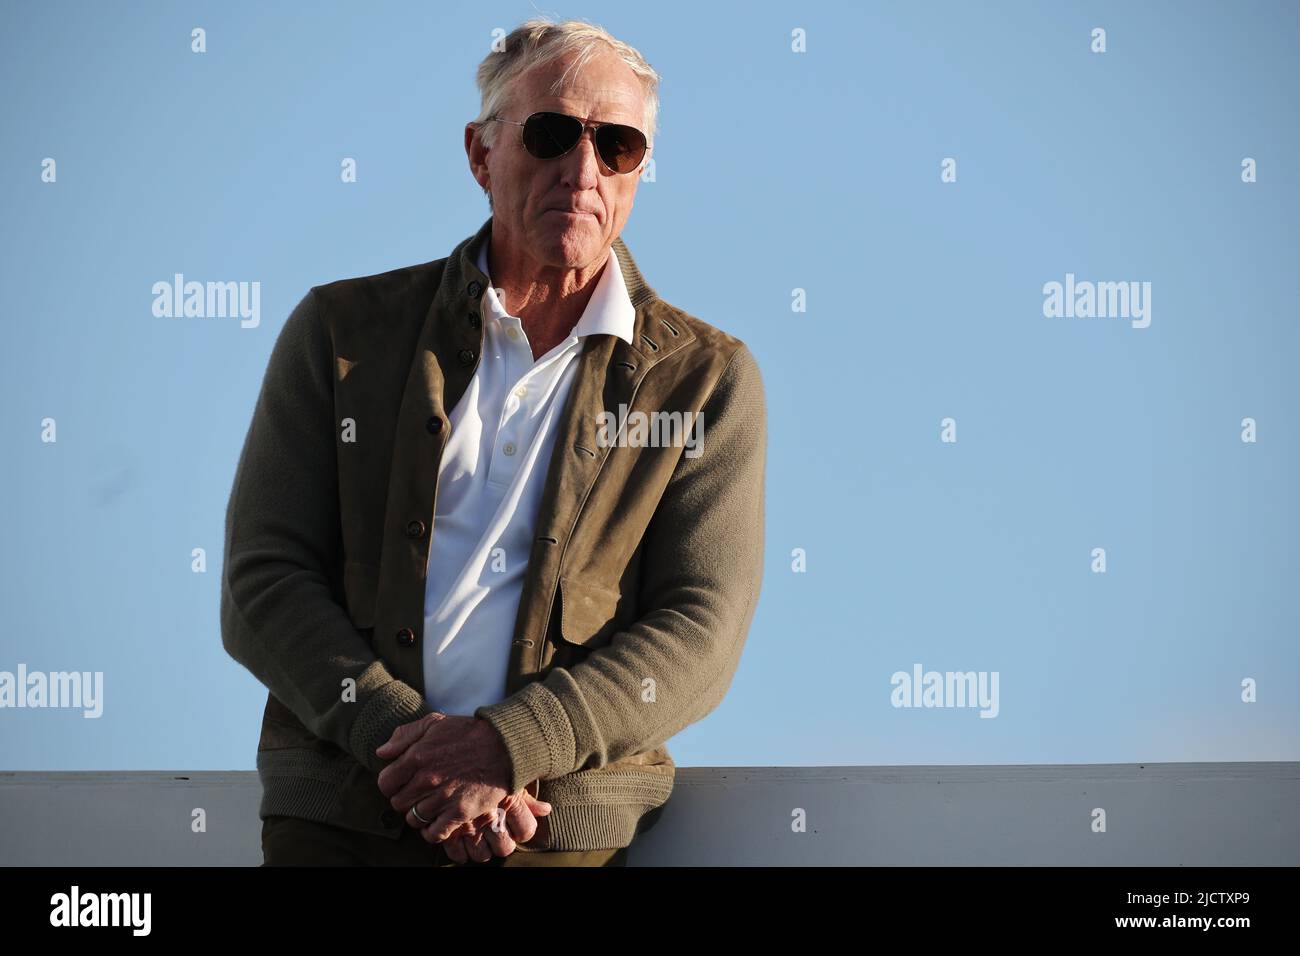 Greg Norman, Australian entrepreneur and retired professional golfer. In 2021, he was named CEO of LIV Golf Investments. Stock Photo